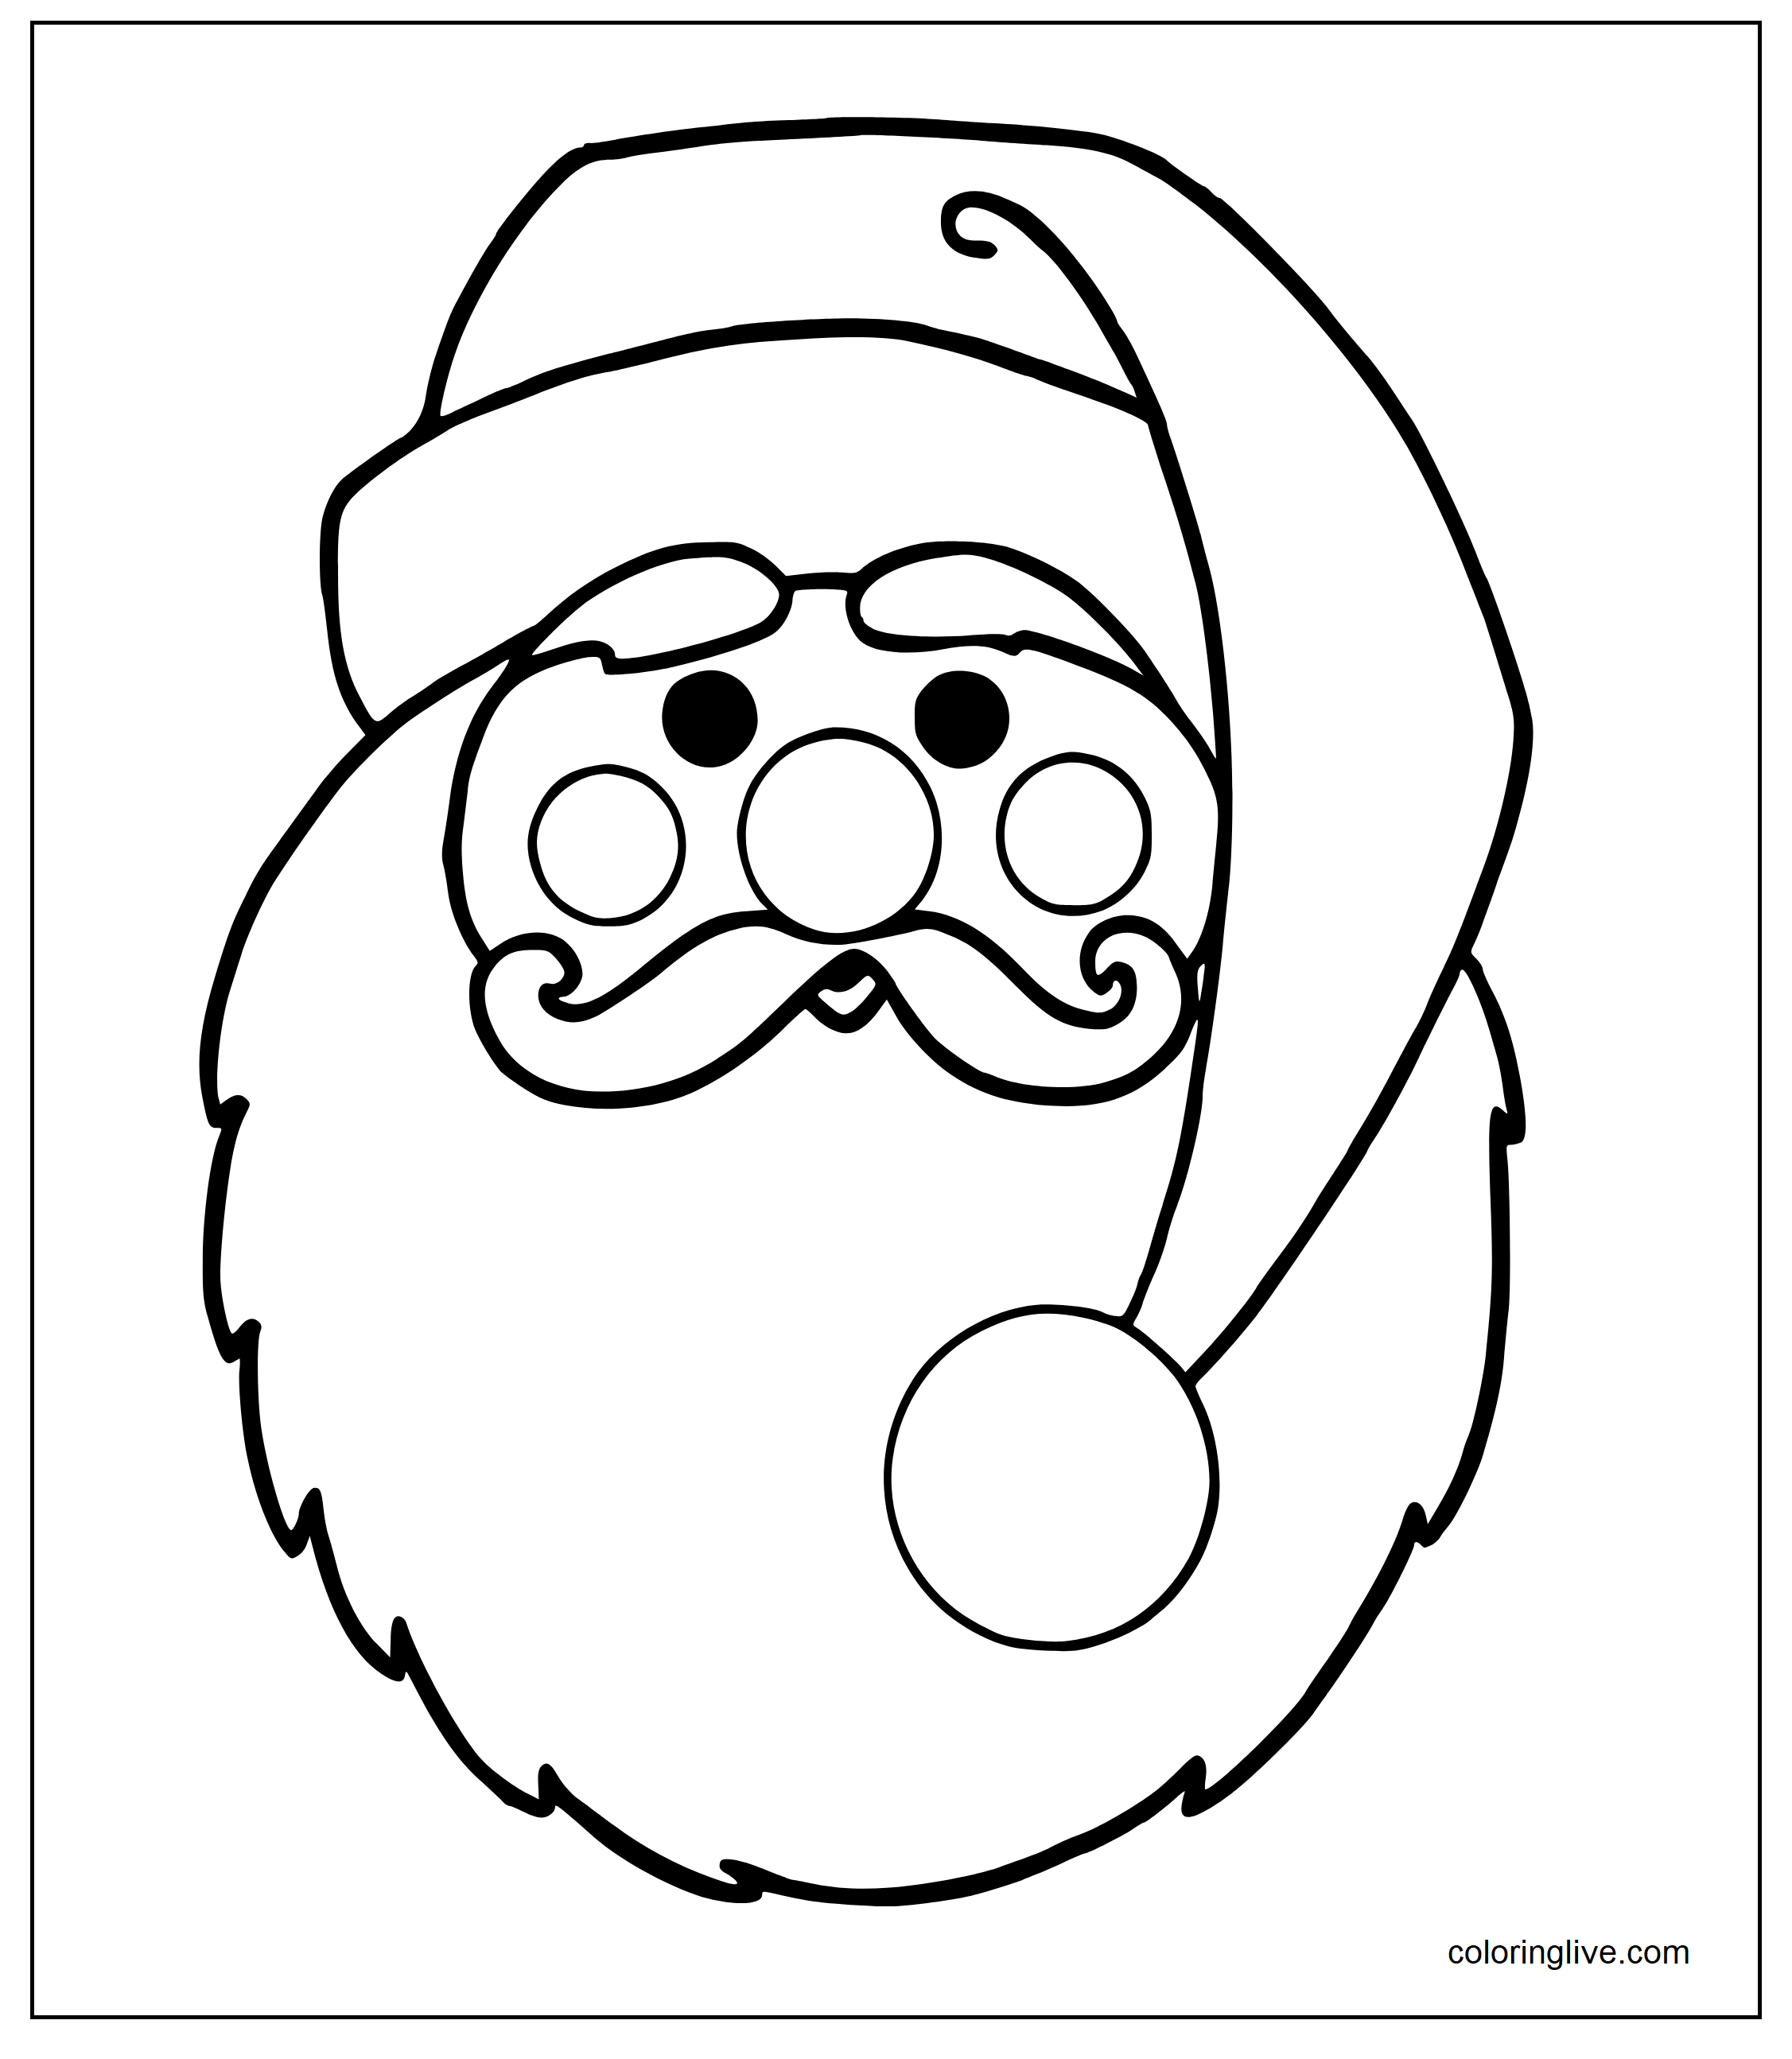 Printable Santa face Coloring Page for kids.